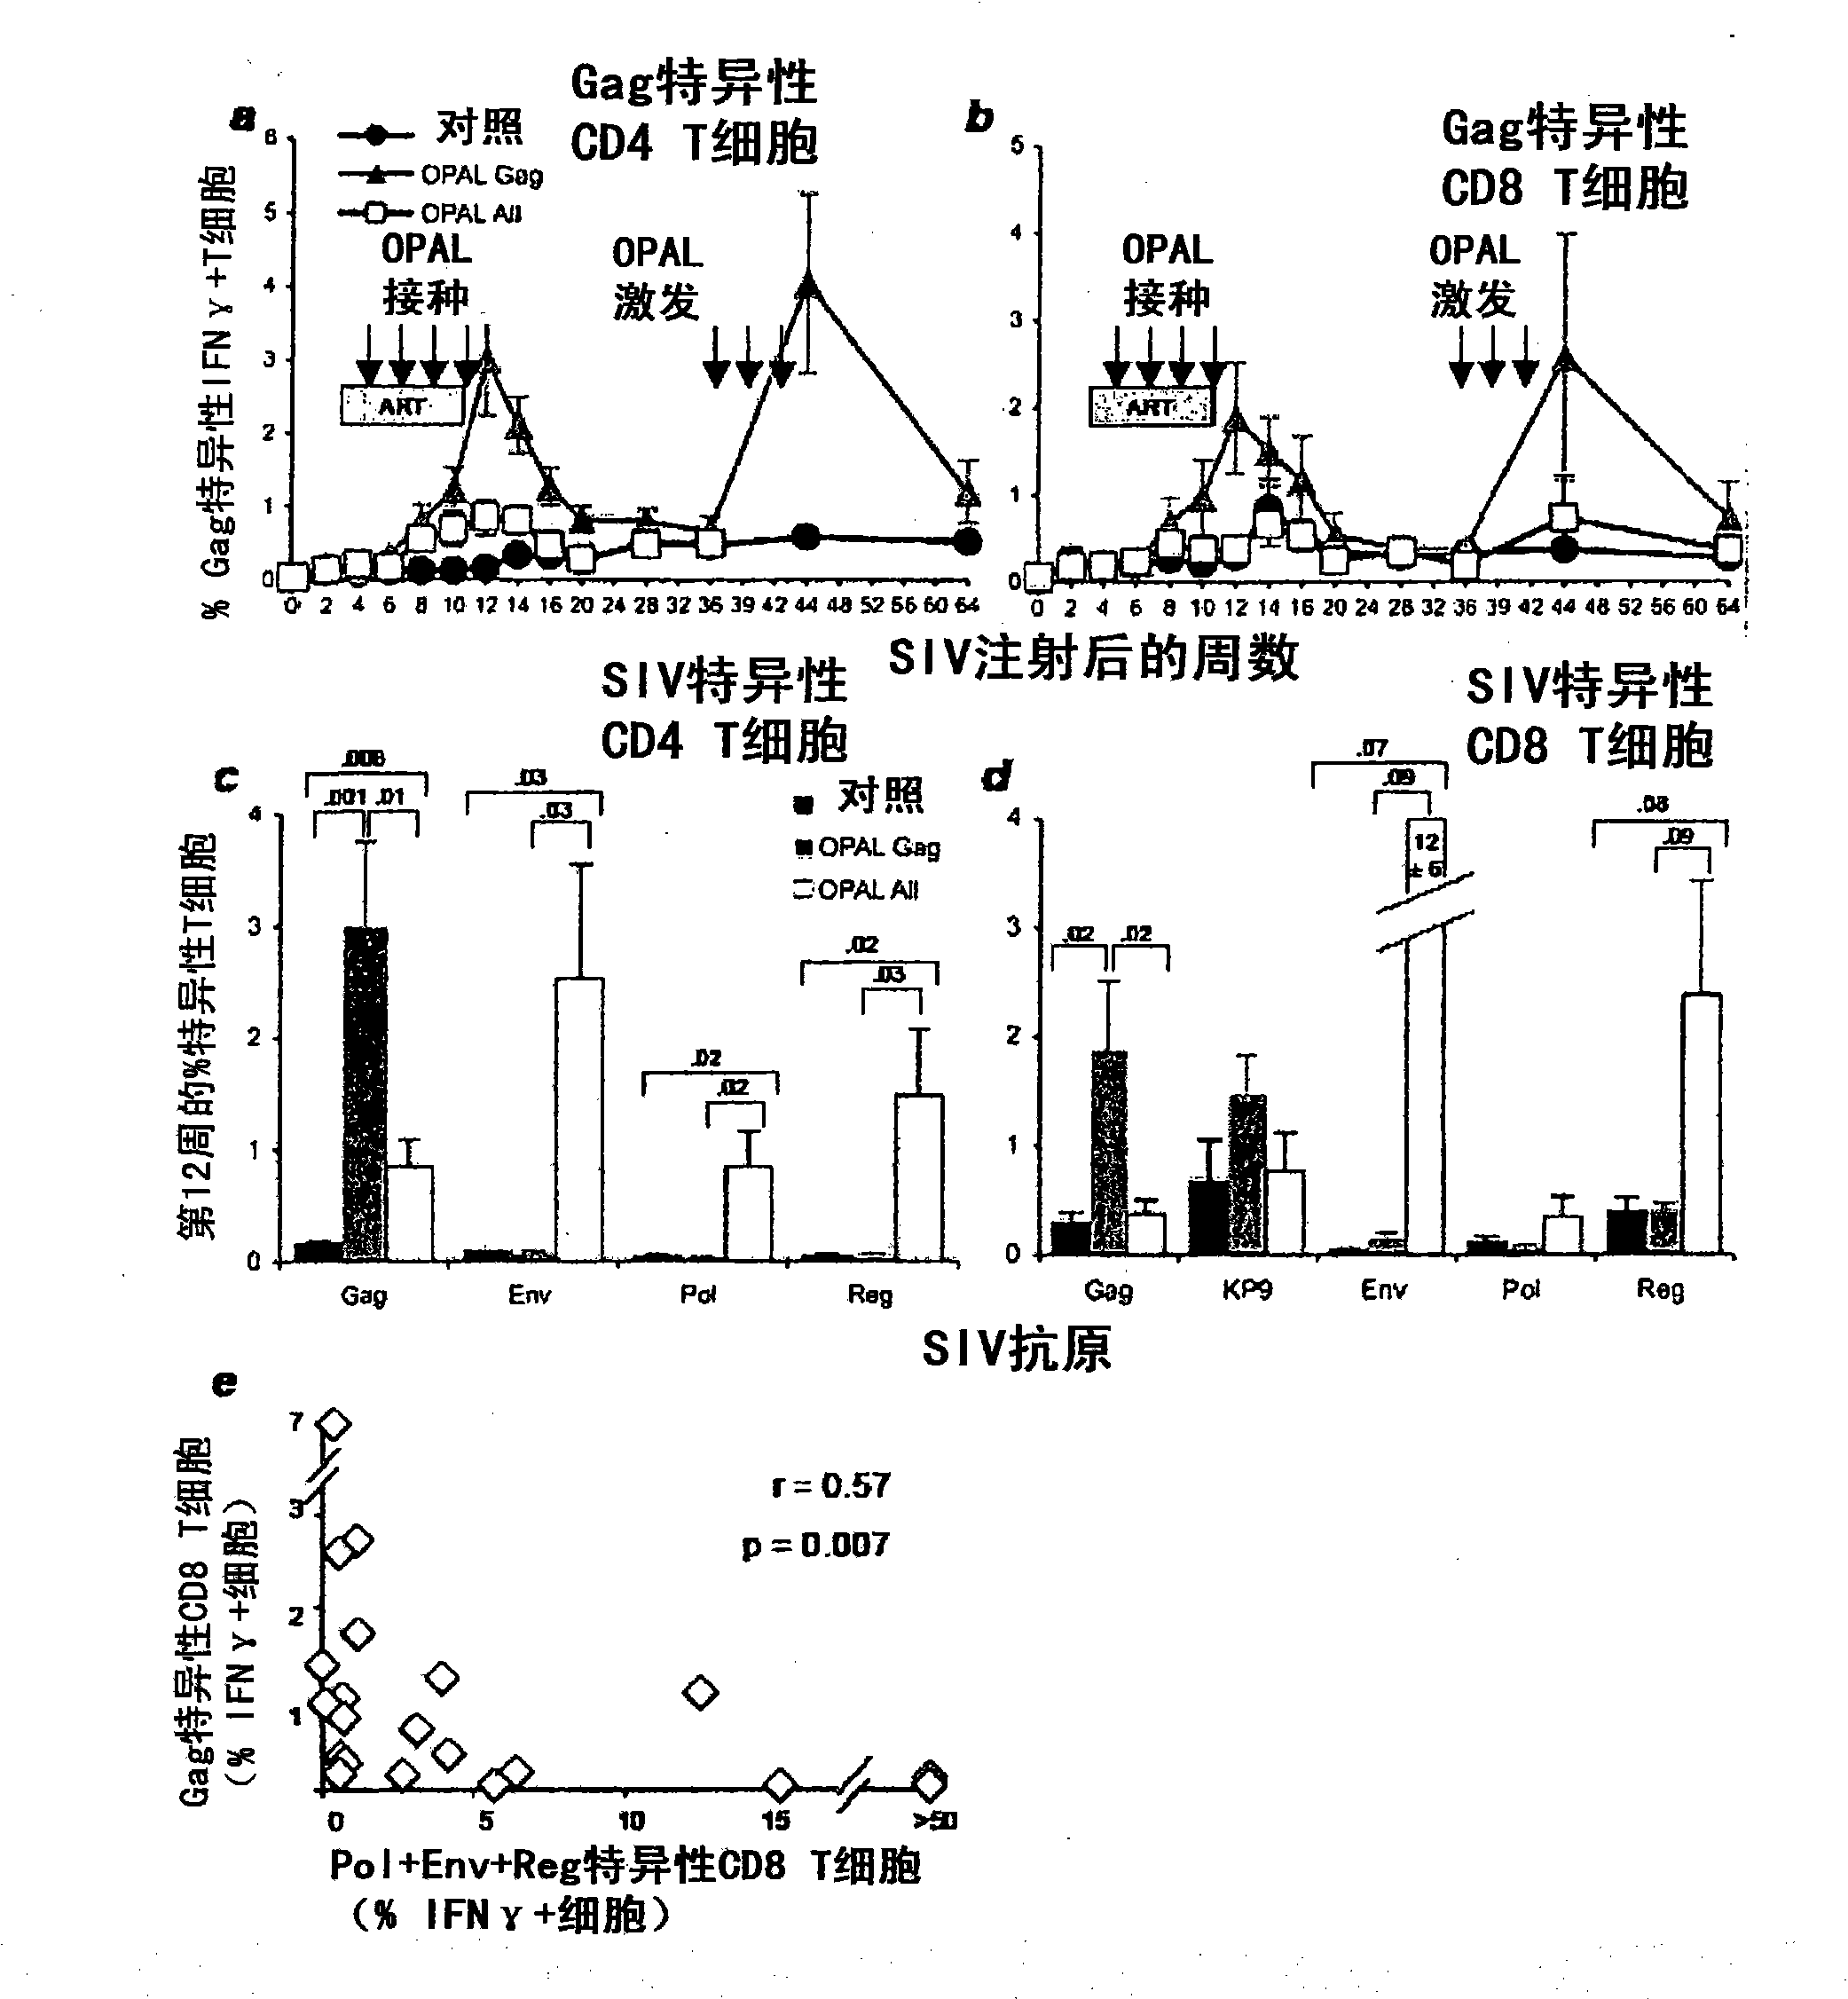 Immunomodulating compositions and uses therefor